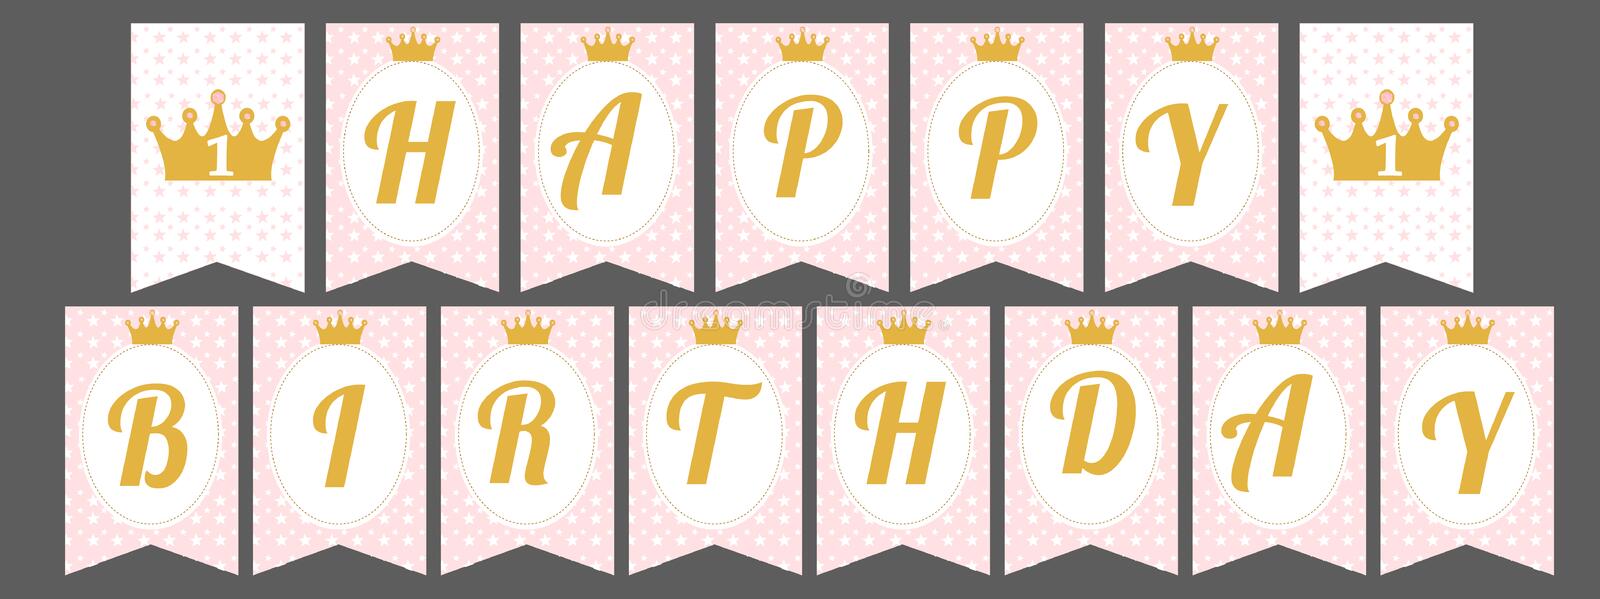 Free Printable Happy Birthday Letters Template_15248